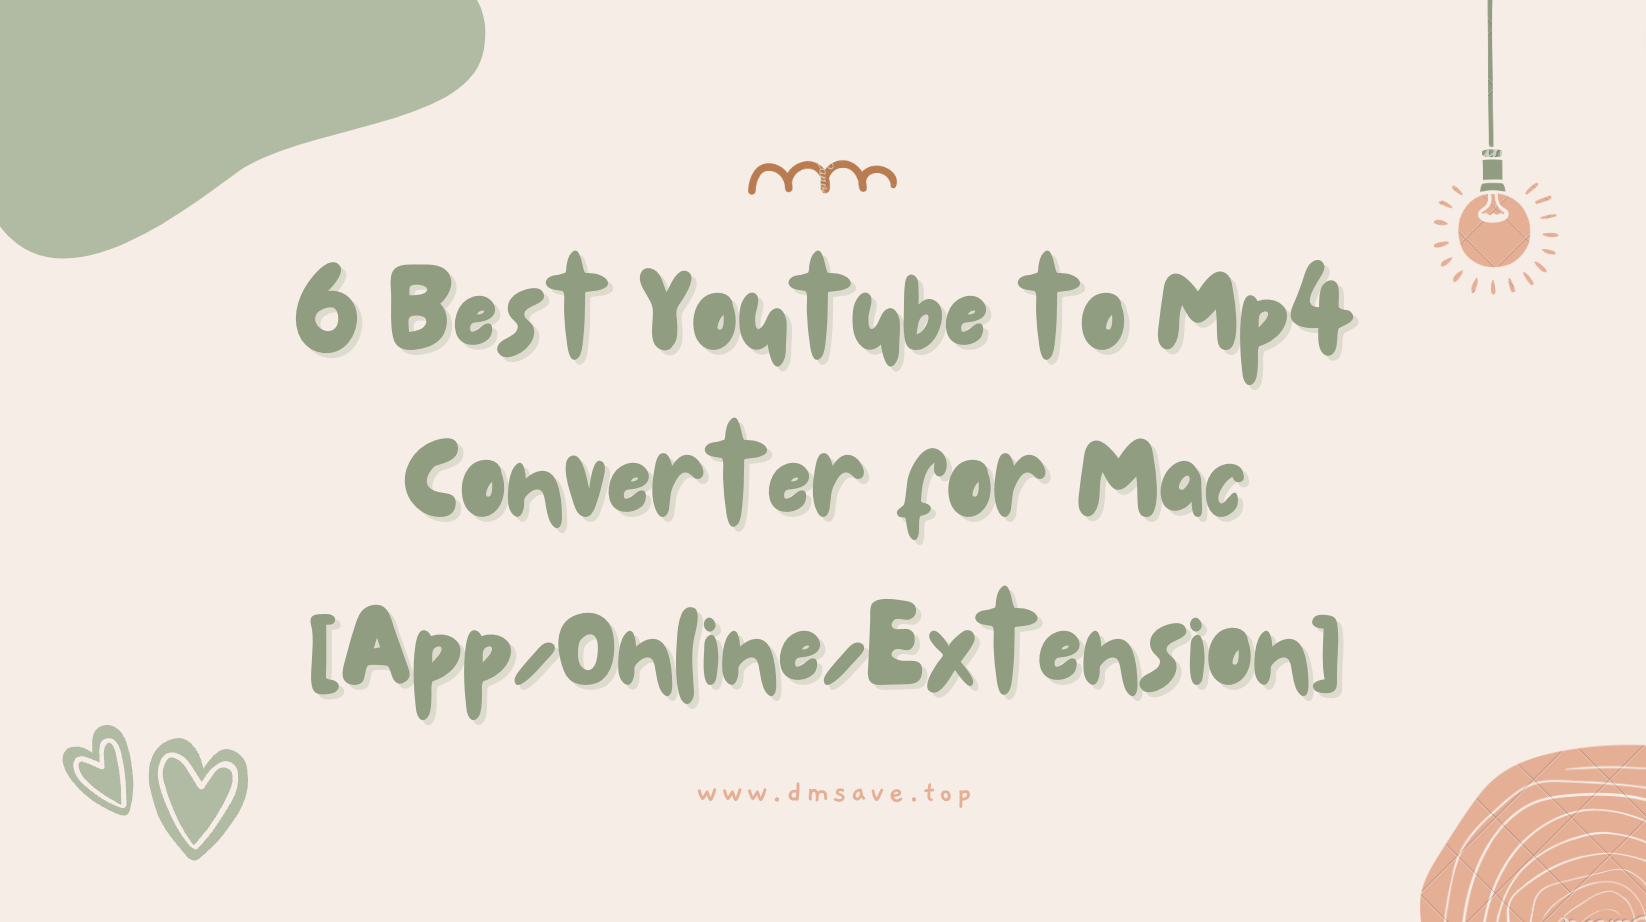 6 Best Youtube to Mp4 Converter for Mac [App/Online/Extension]